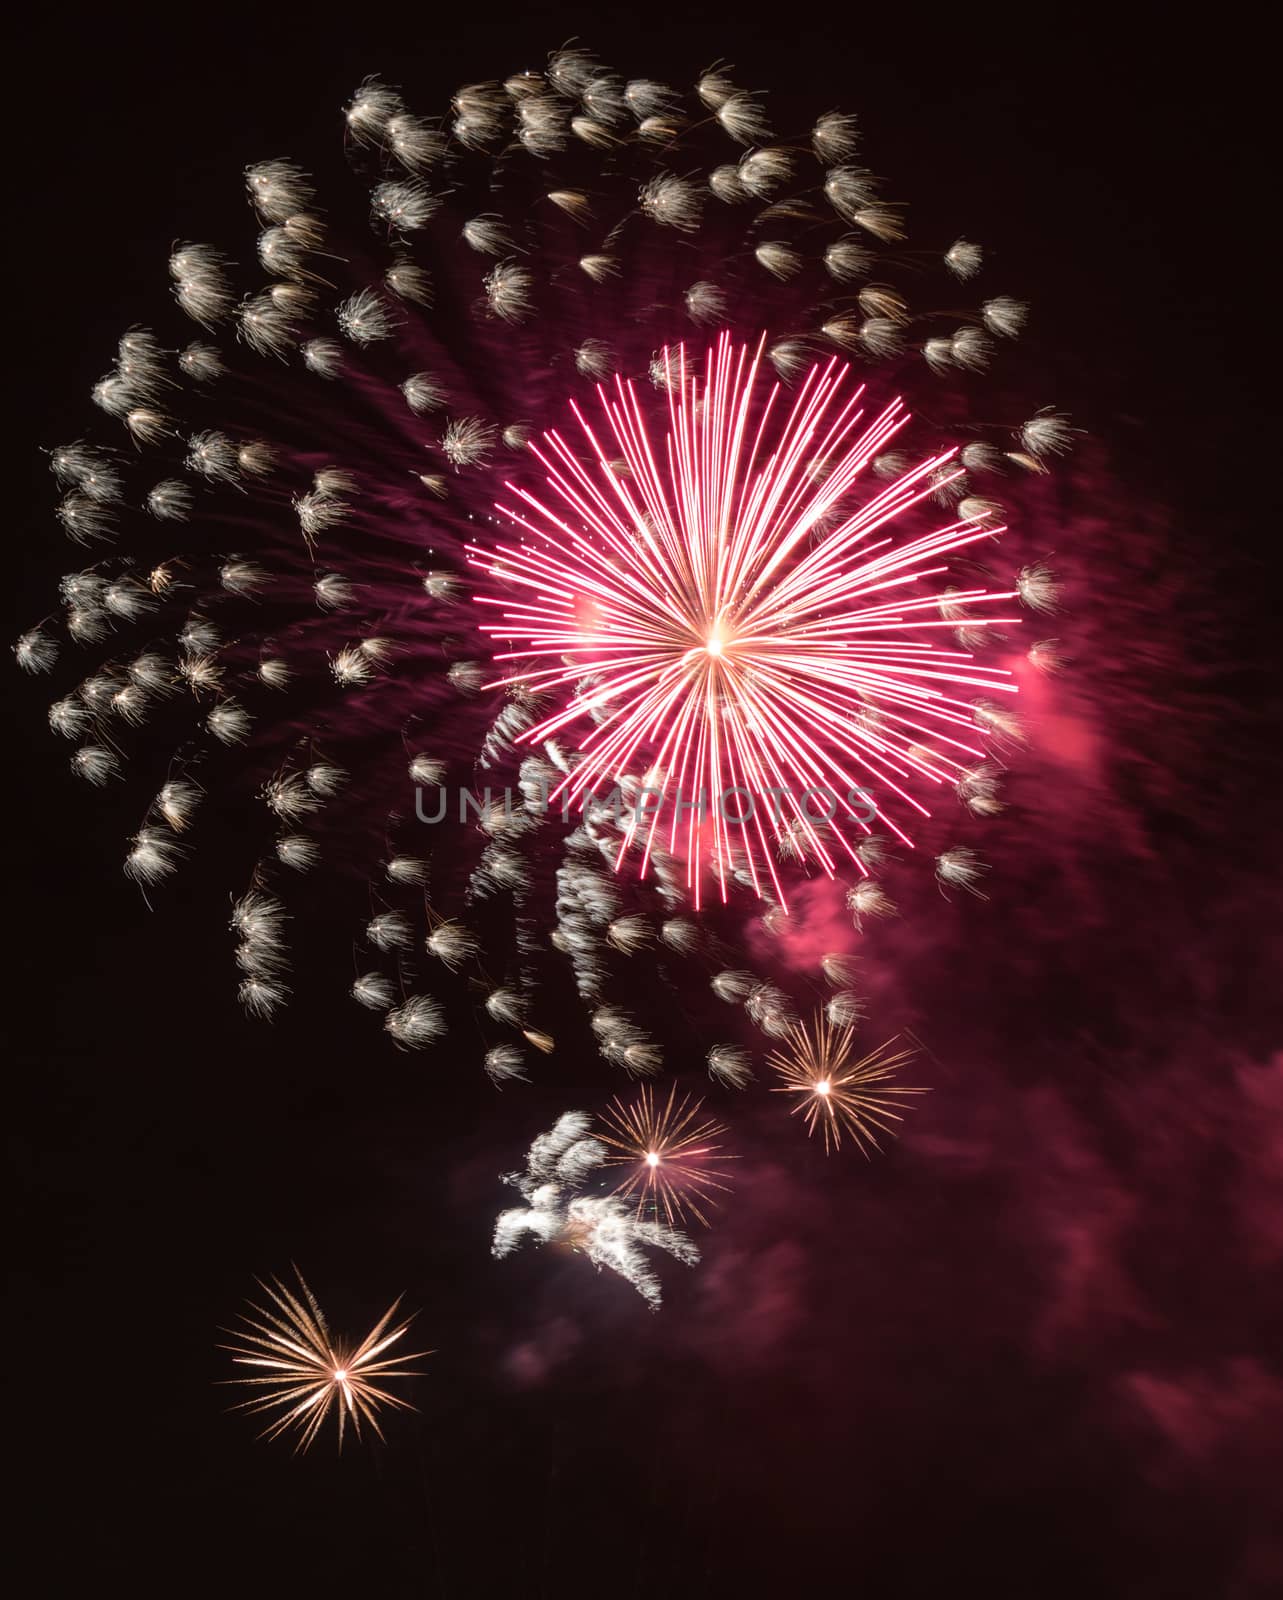 Brightly colorful fireworks and salute of various colors in the night sky background